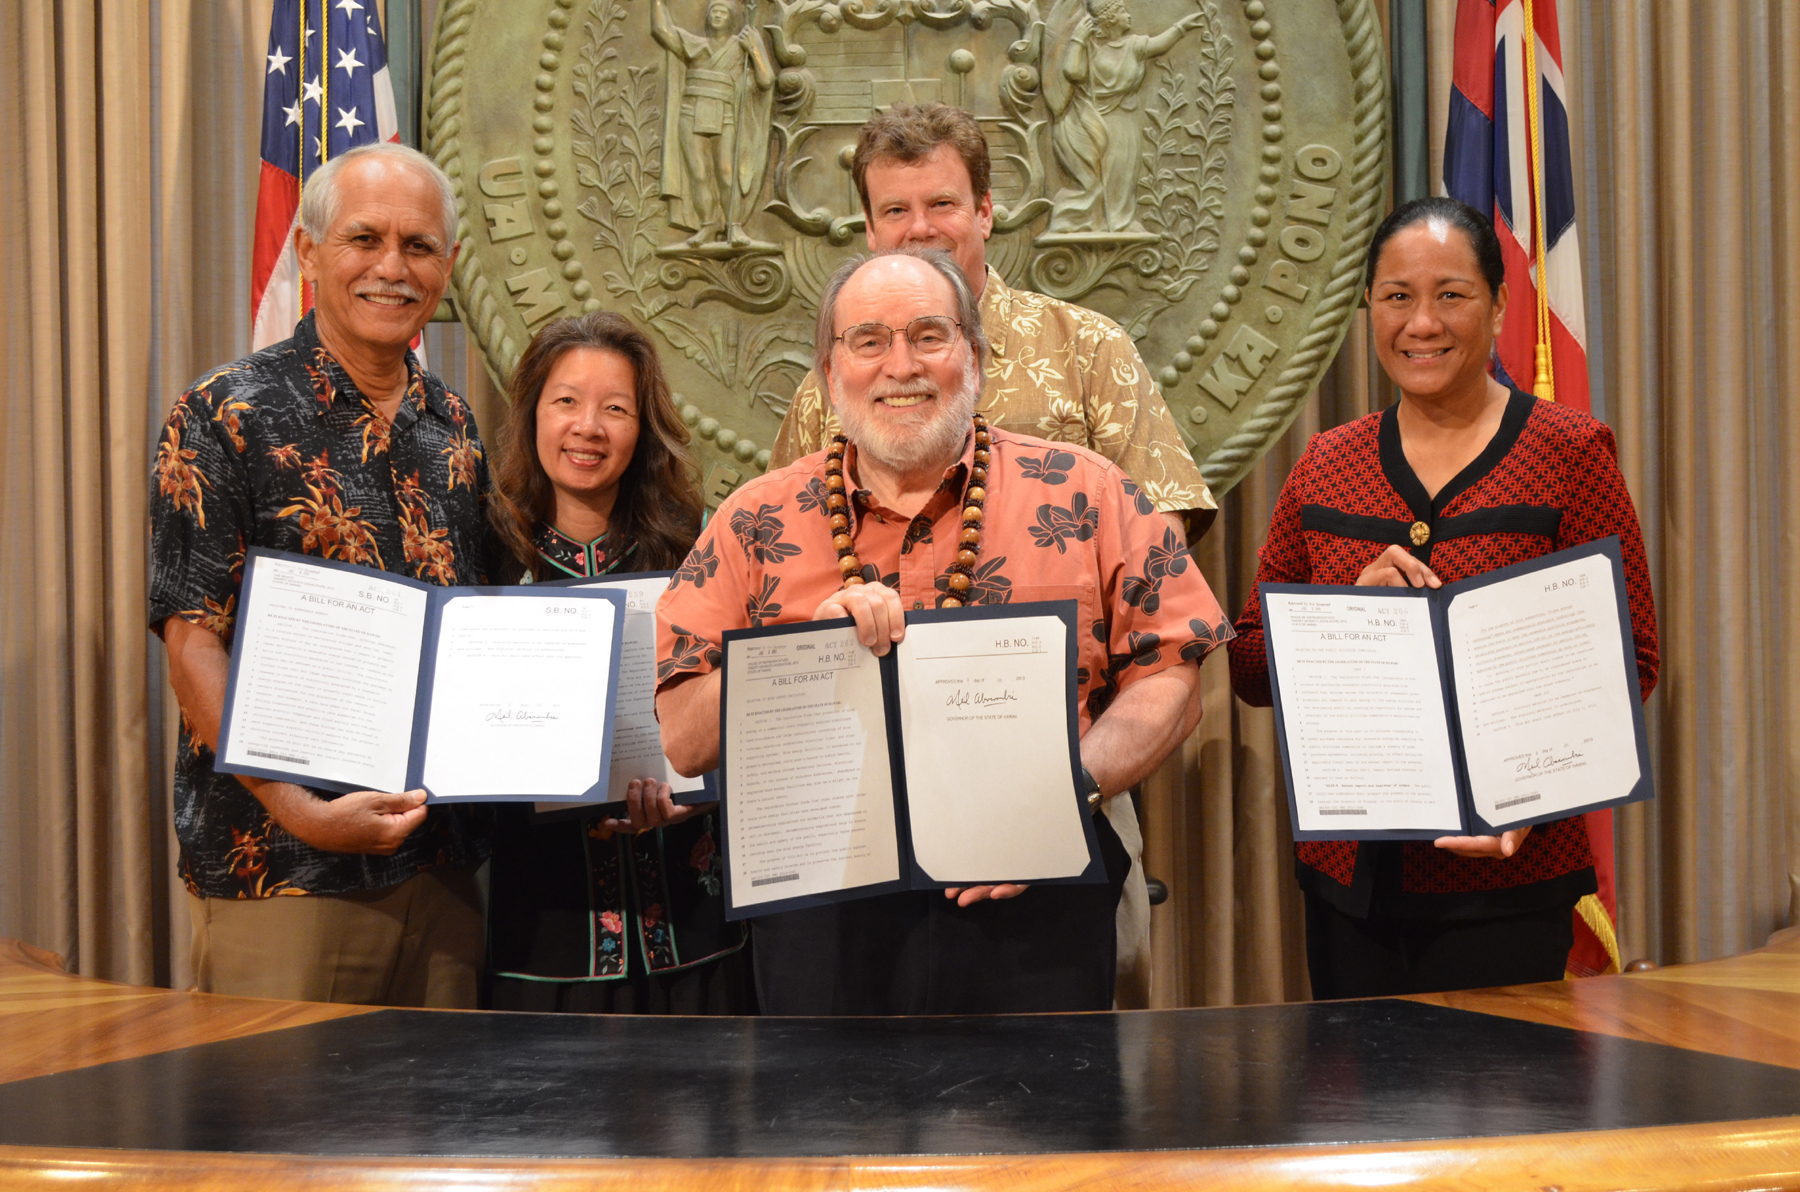 PV Renter bill signed into law in Hawaii